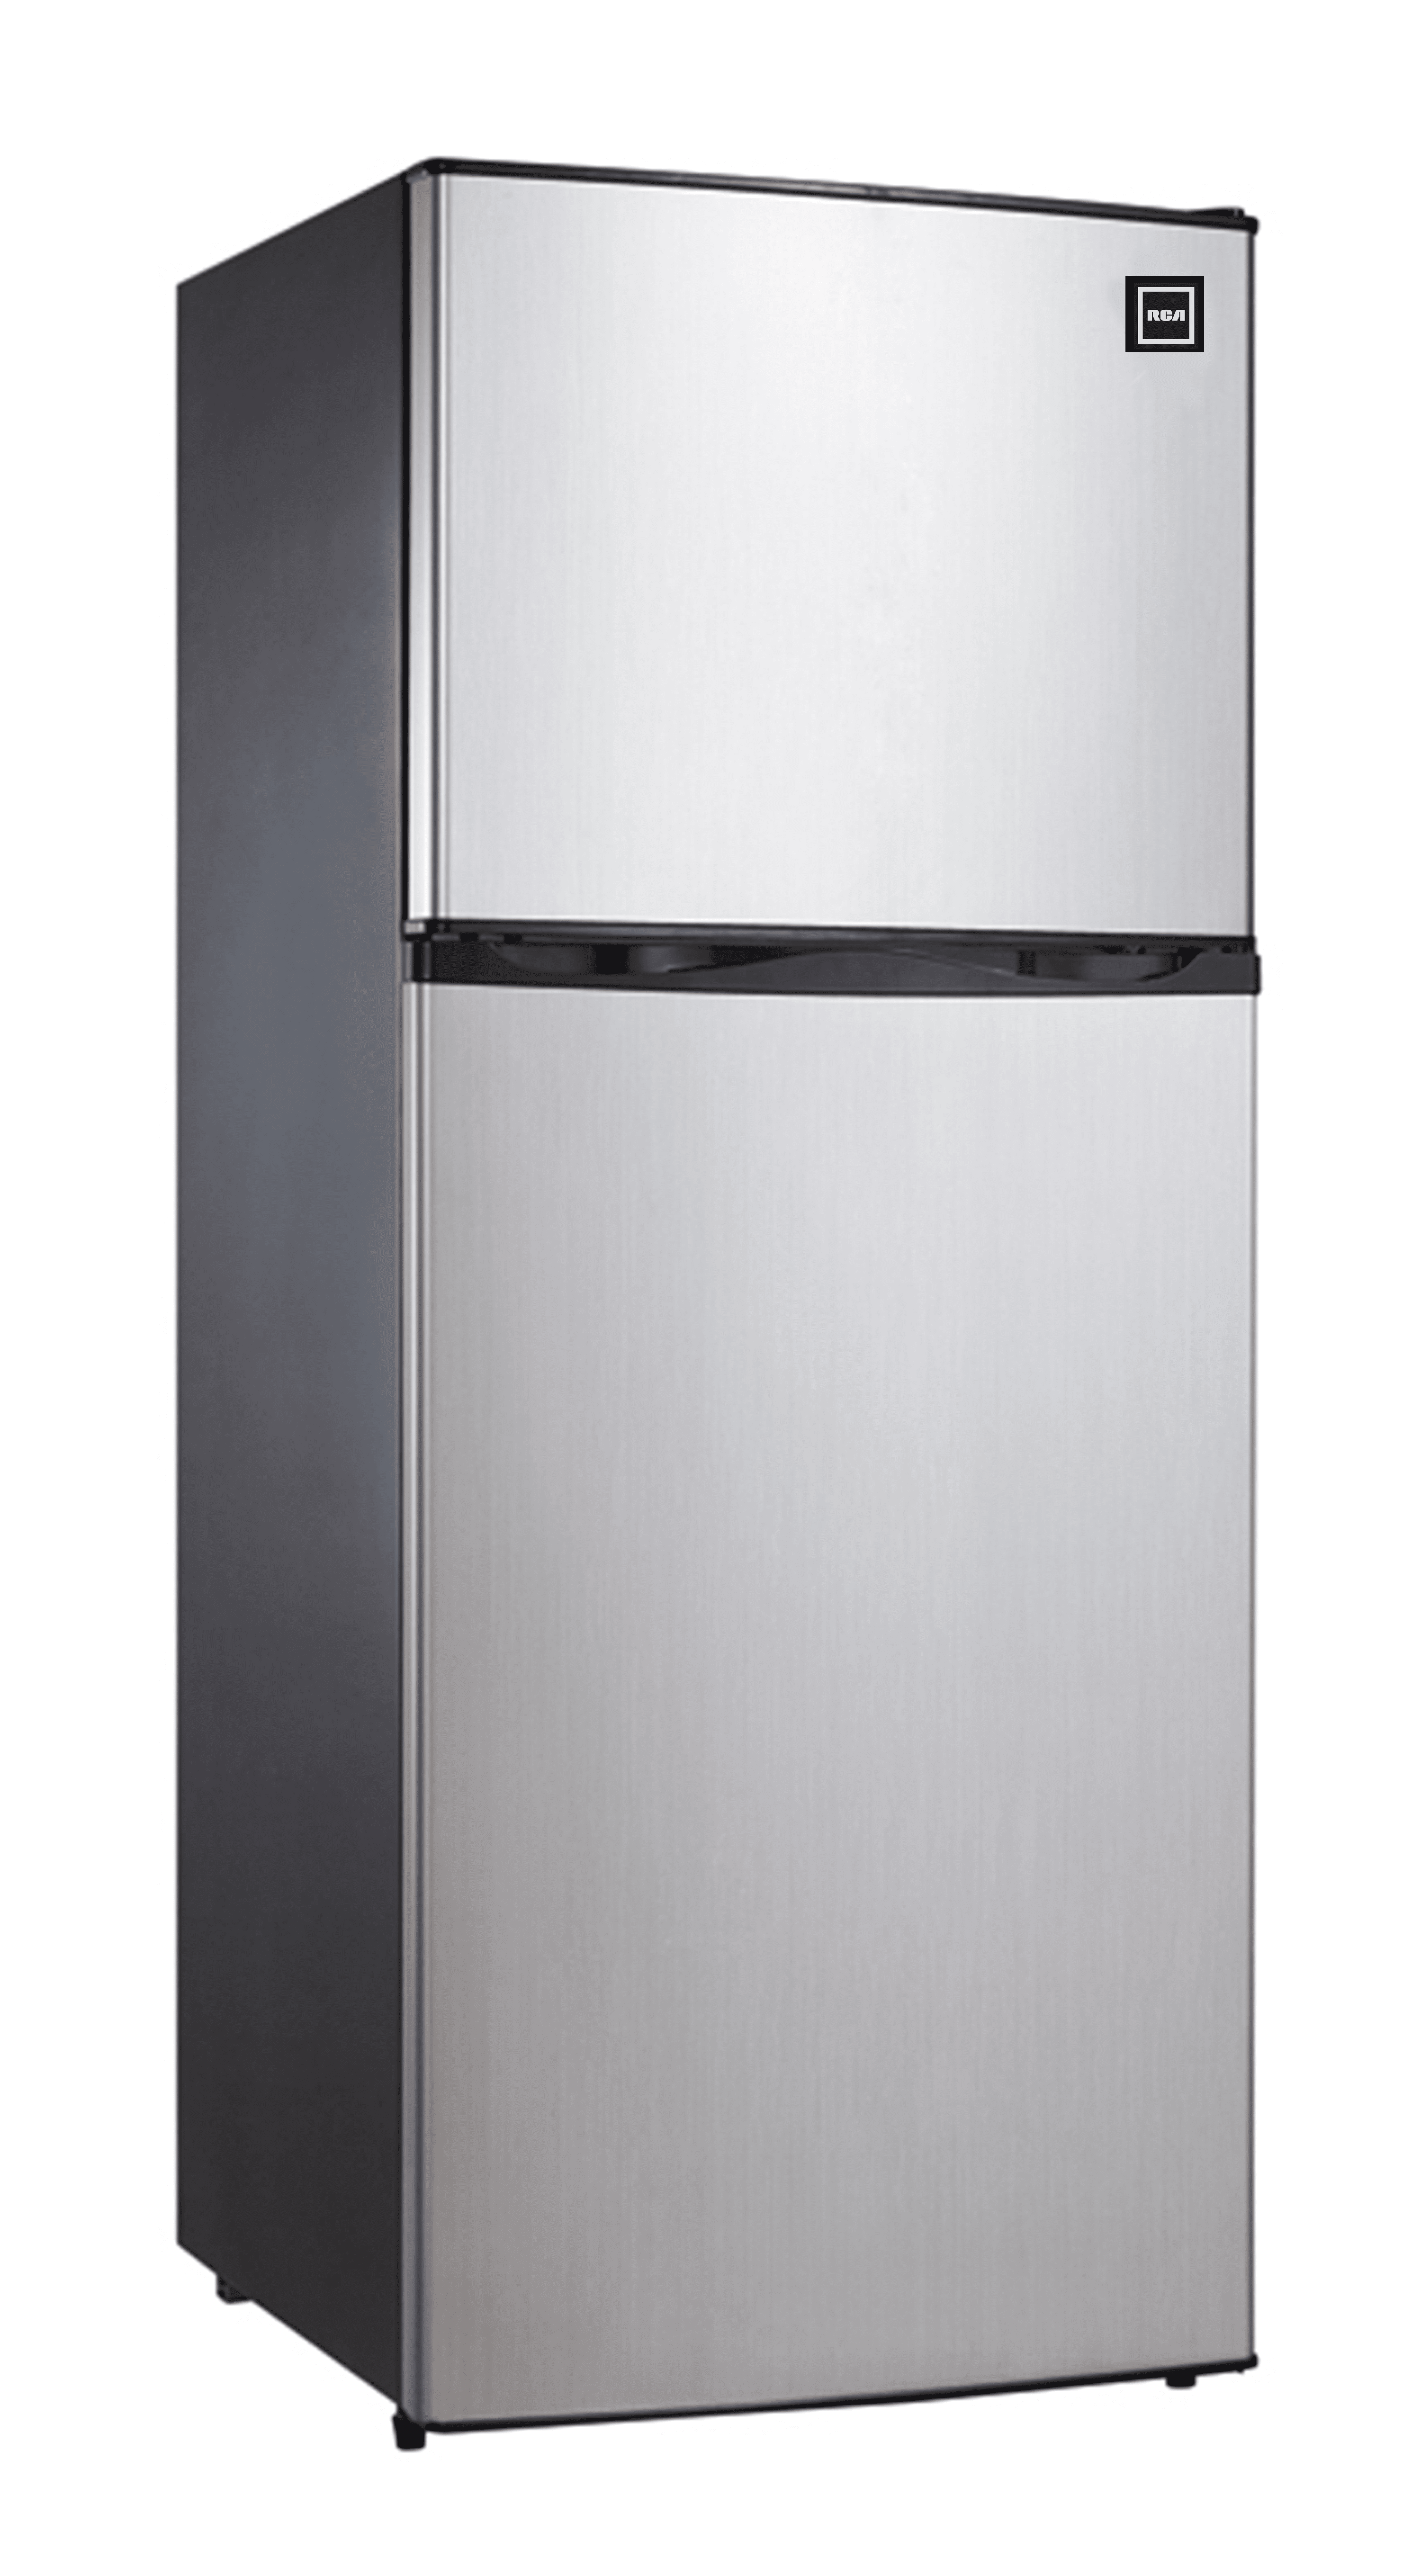 RCA - 12 Cu Ft Top-Freezer Apartment-size Refrigerator - Stainless